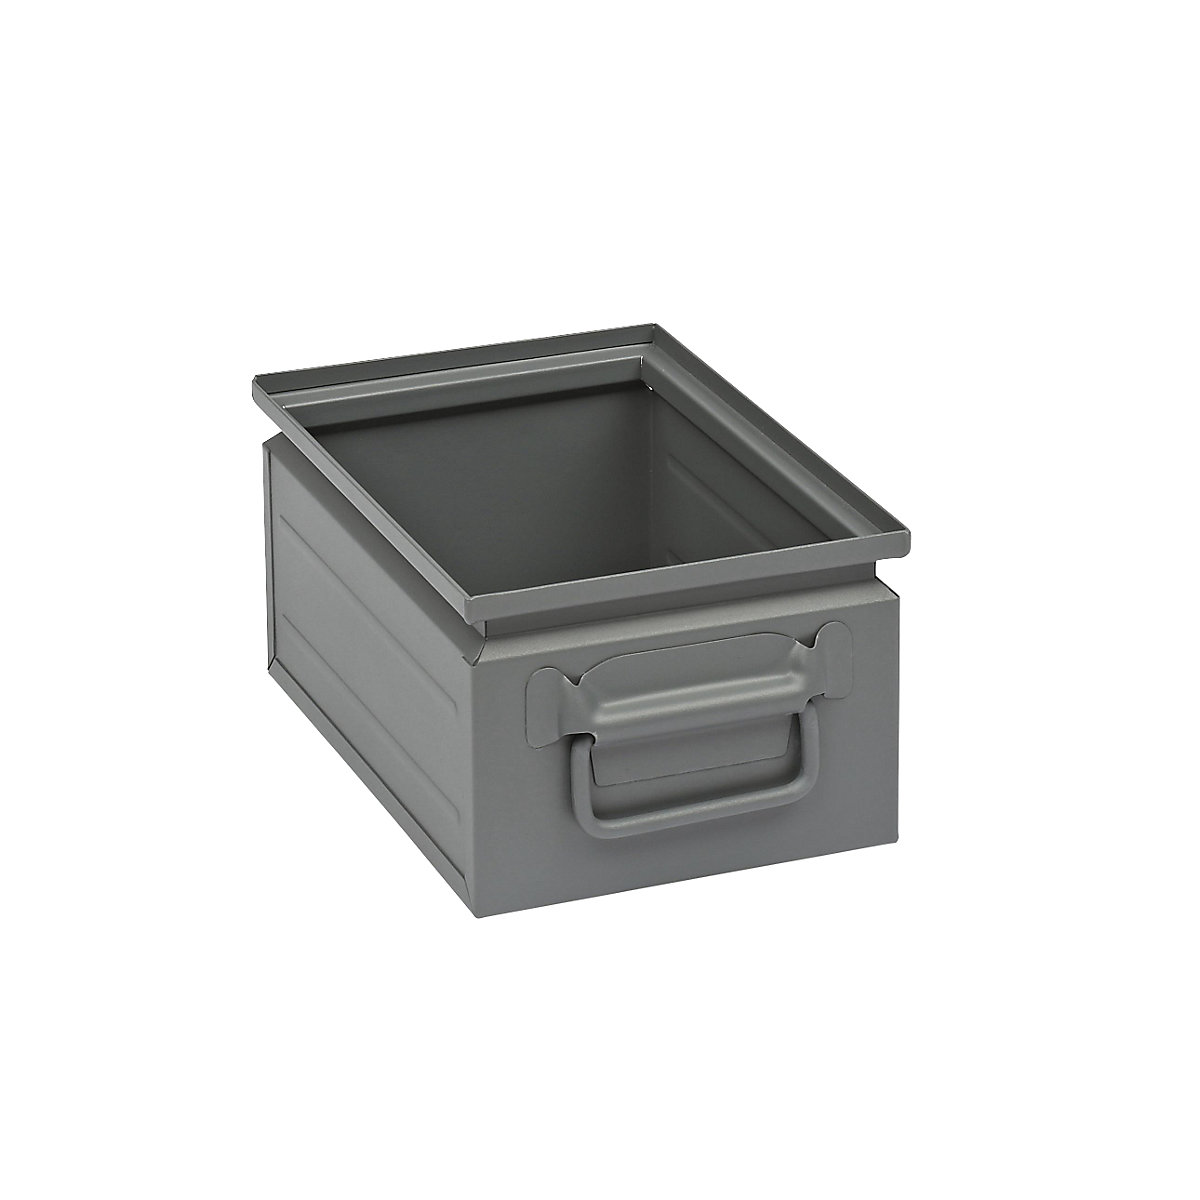 Stacking container made of sheet steel, capacity approx. 9 l, basalt grey RAL 7012